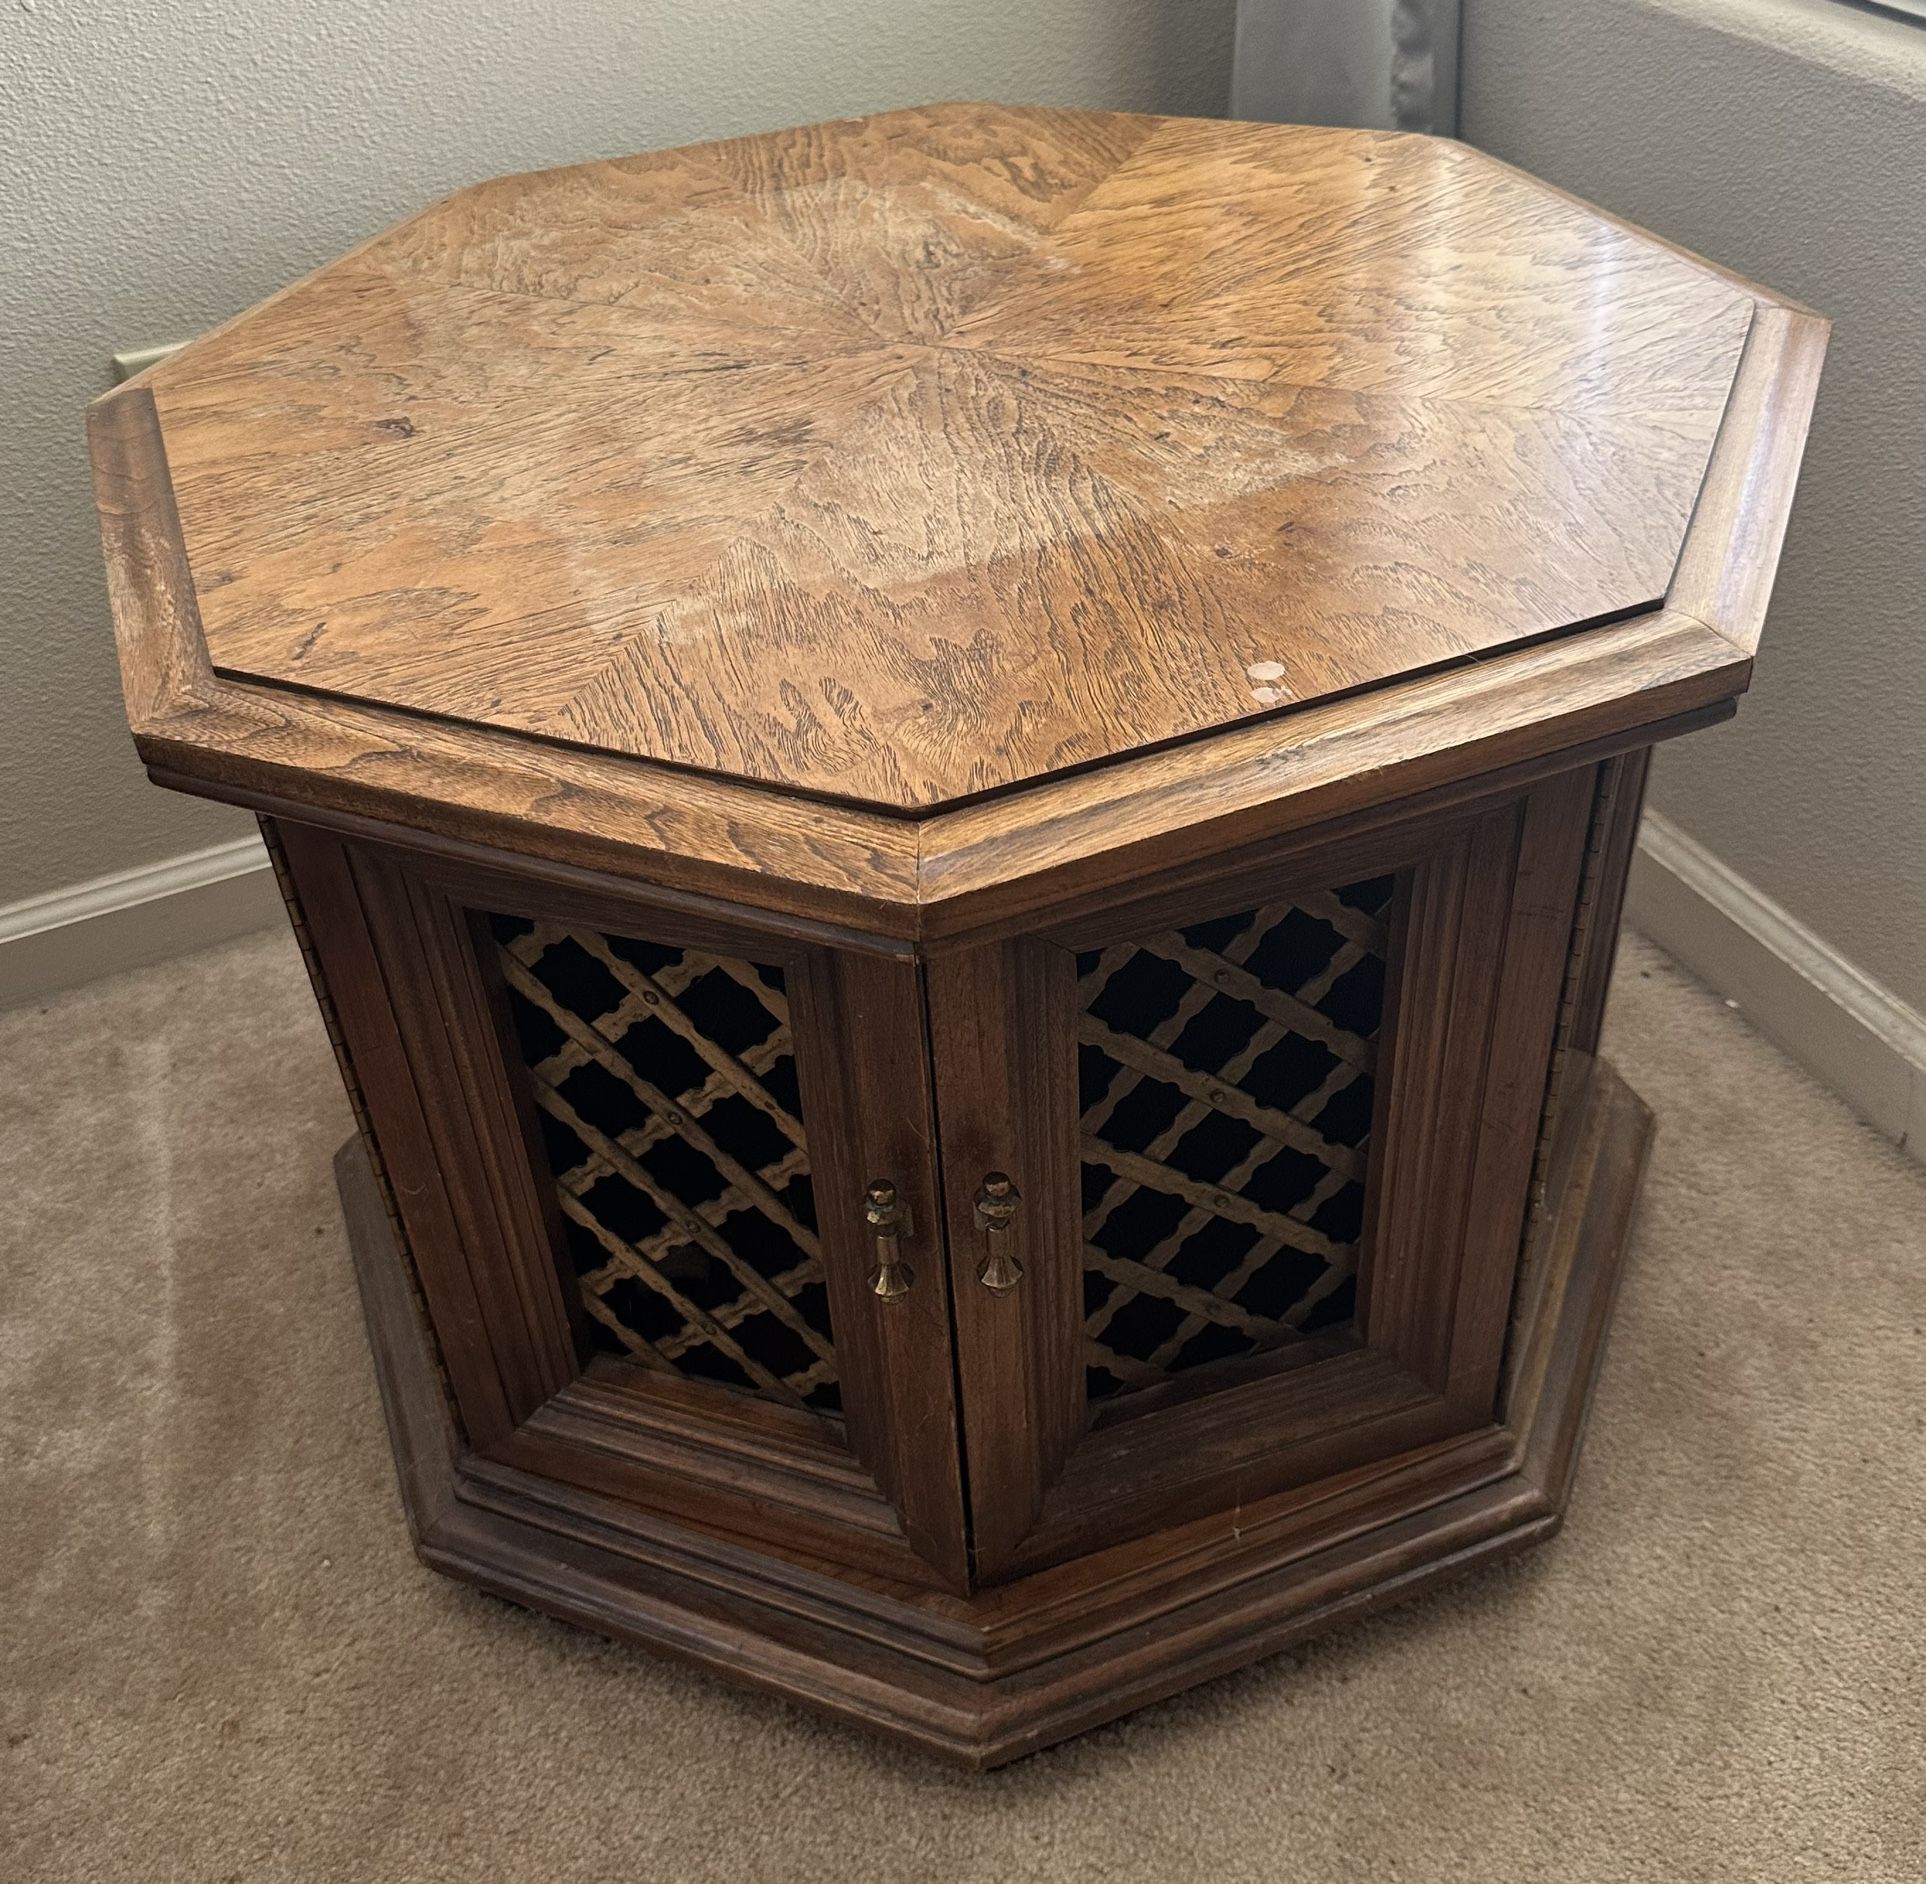 Vintage Octagon Wood Side Table with Built In Cabinet